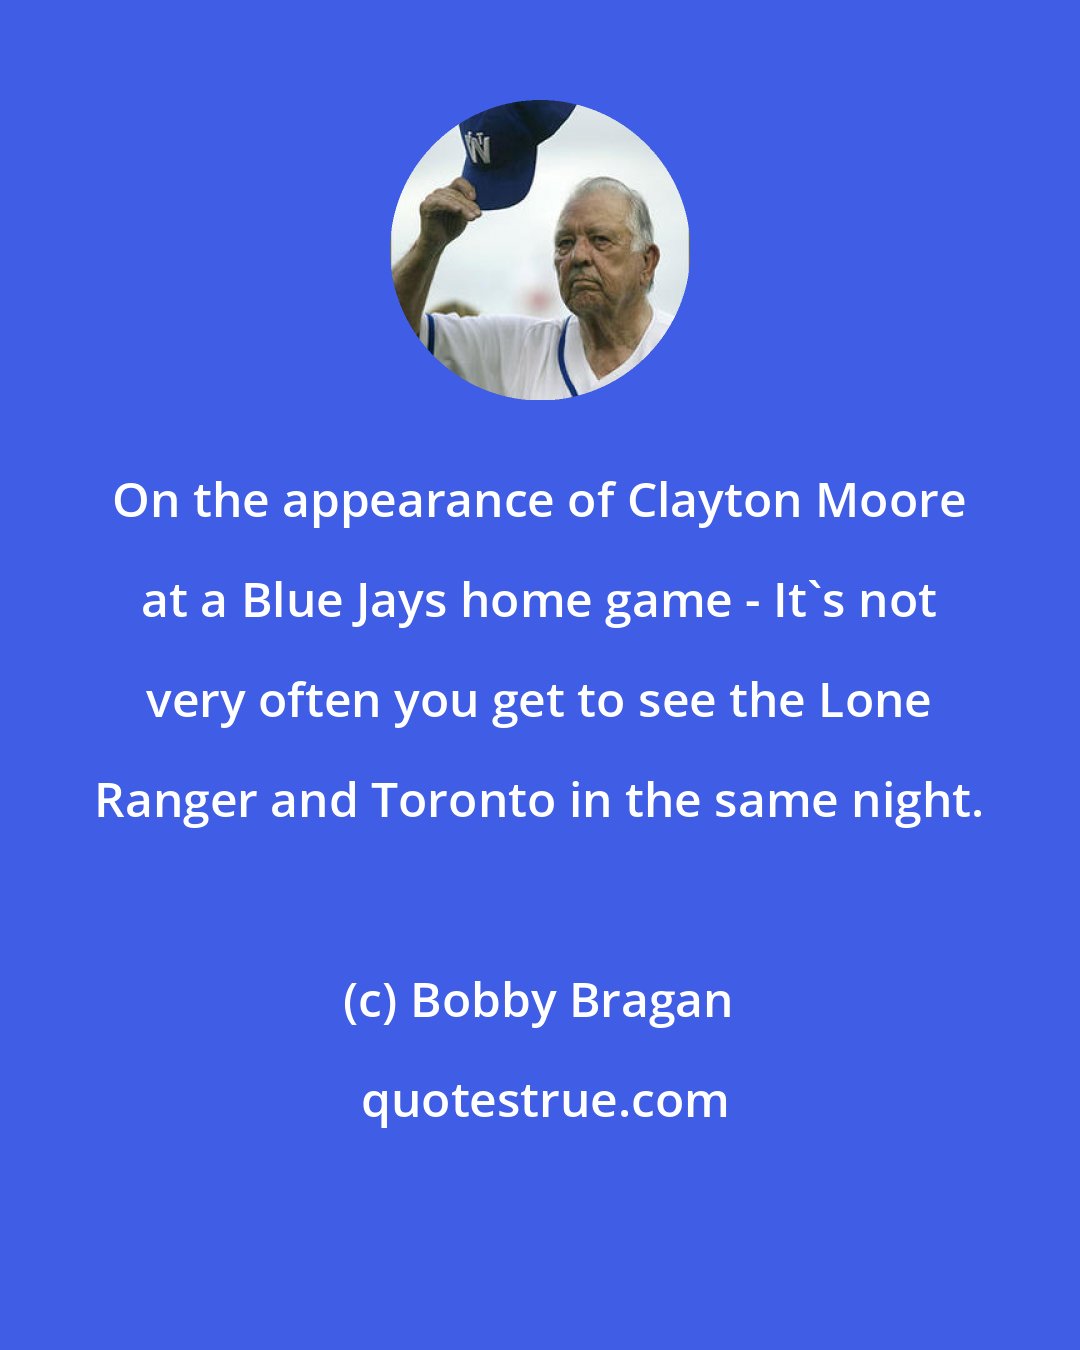 Bobby Bragan: On the appearance of Clayton Moore at a Blue Jays home game - It's not very often you get to see the Lone Ranger and Toronto in the same night.